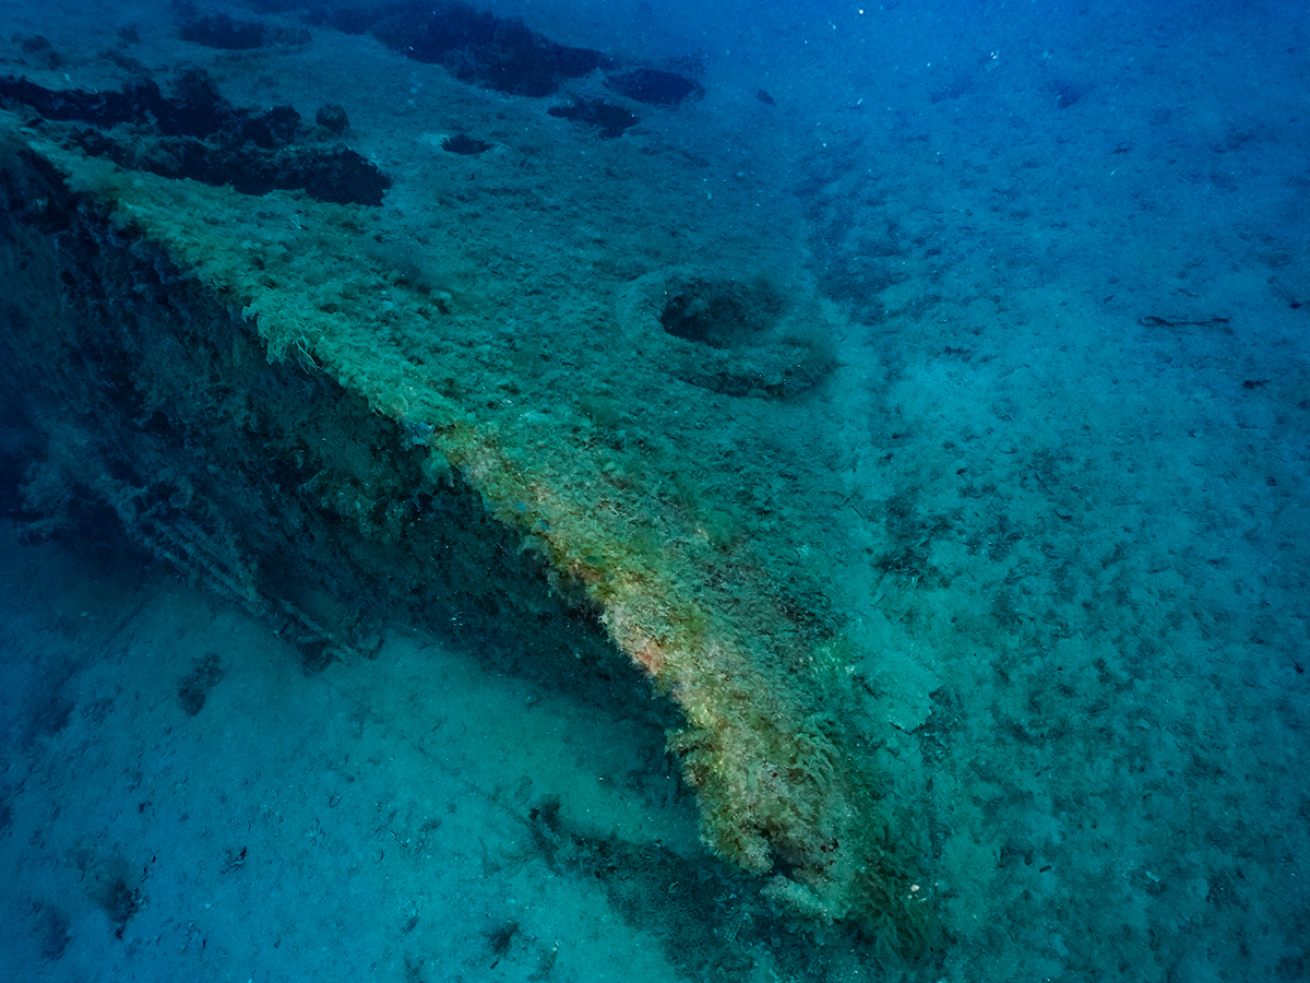 A shipwreck in the bottom of the ocean.